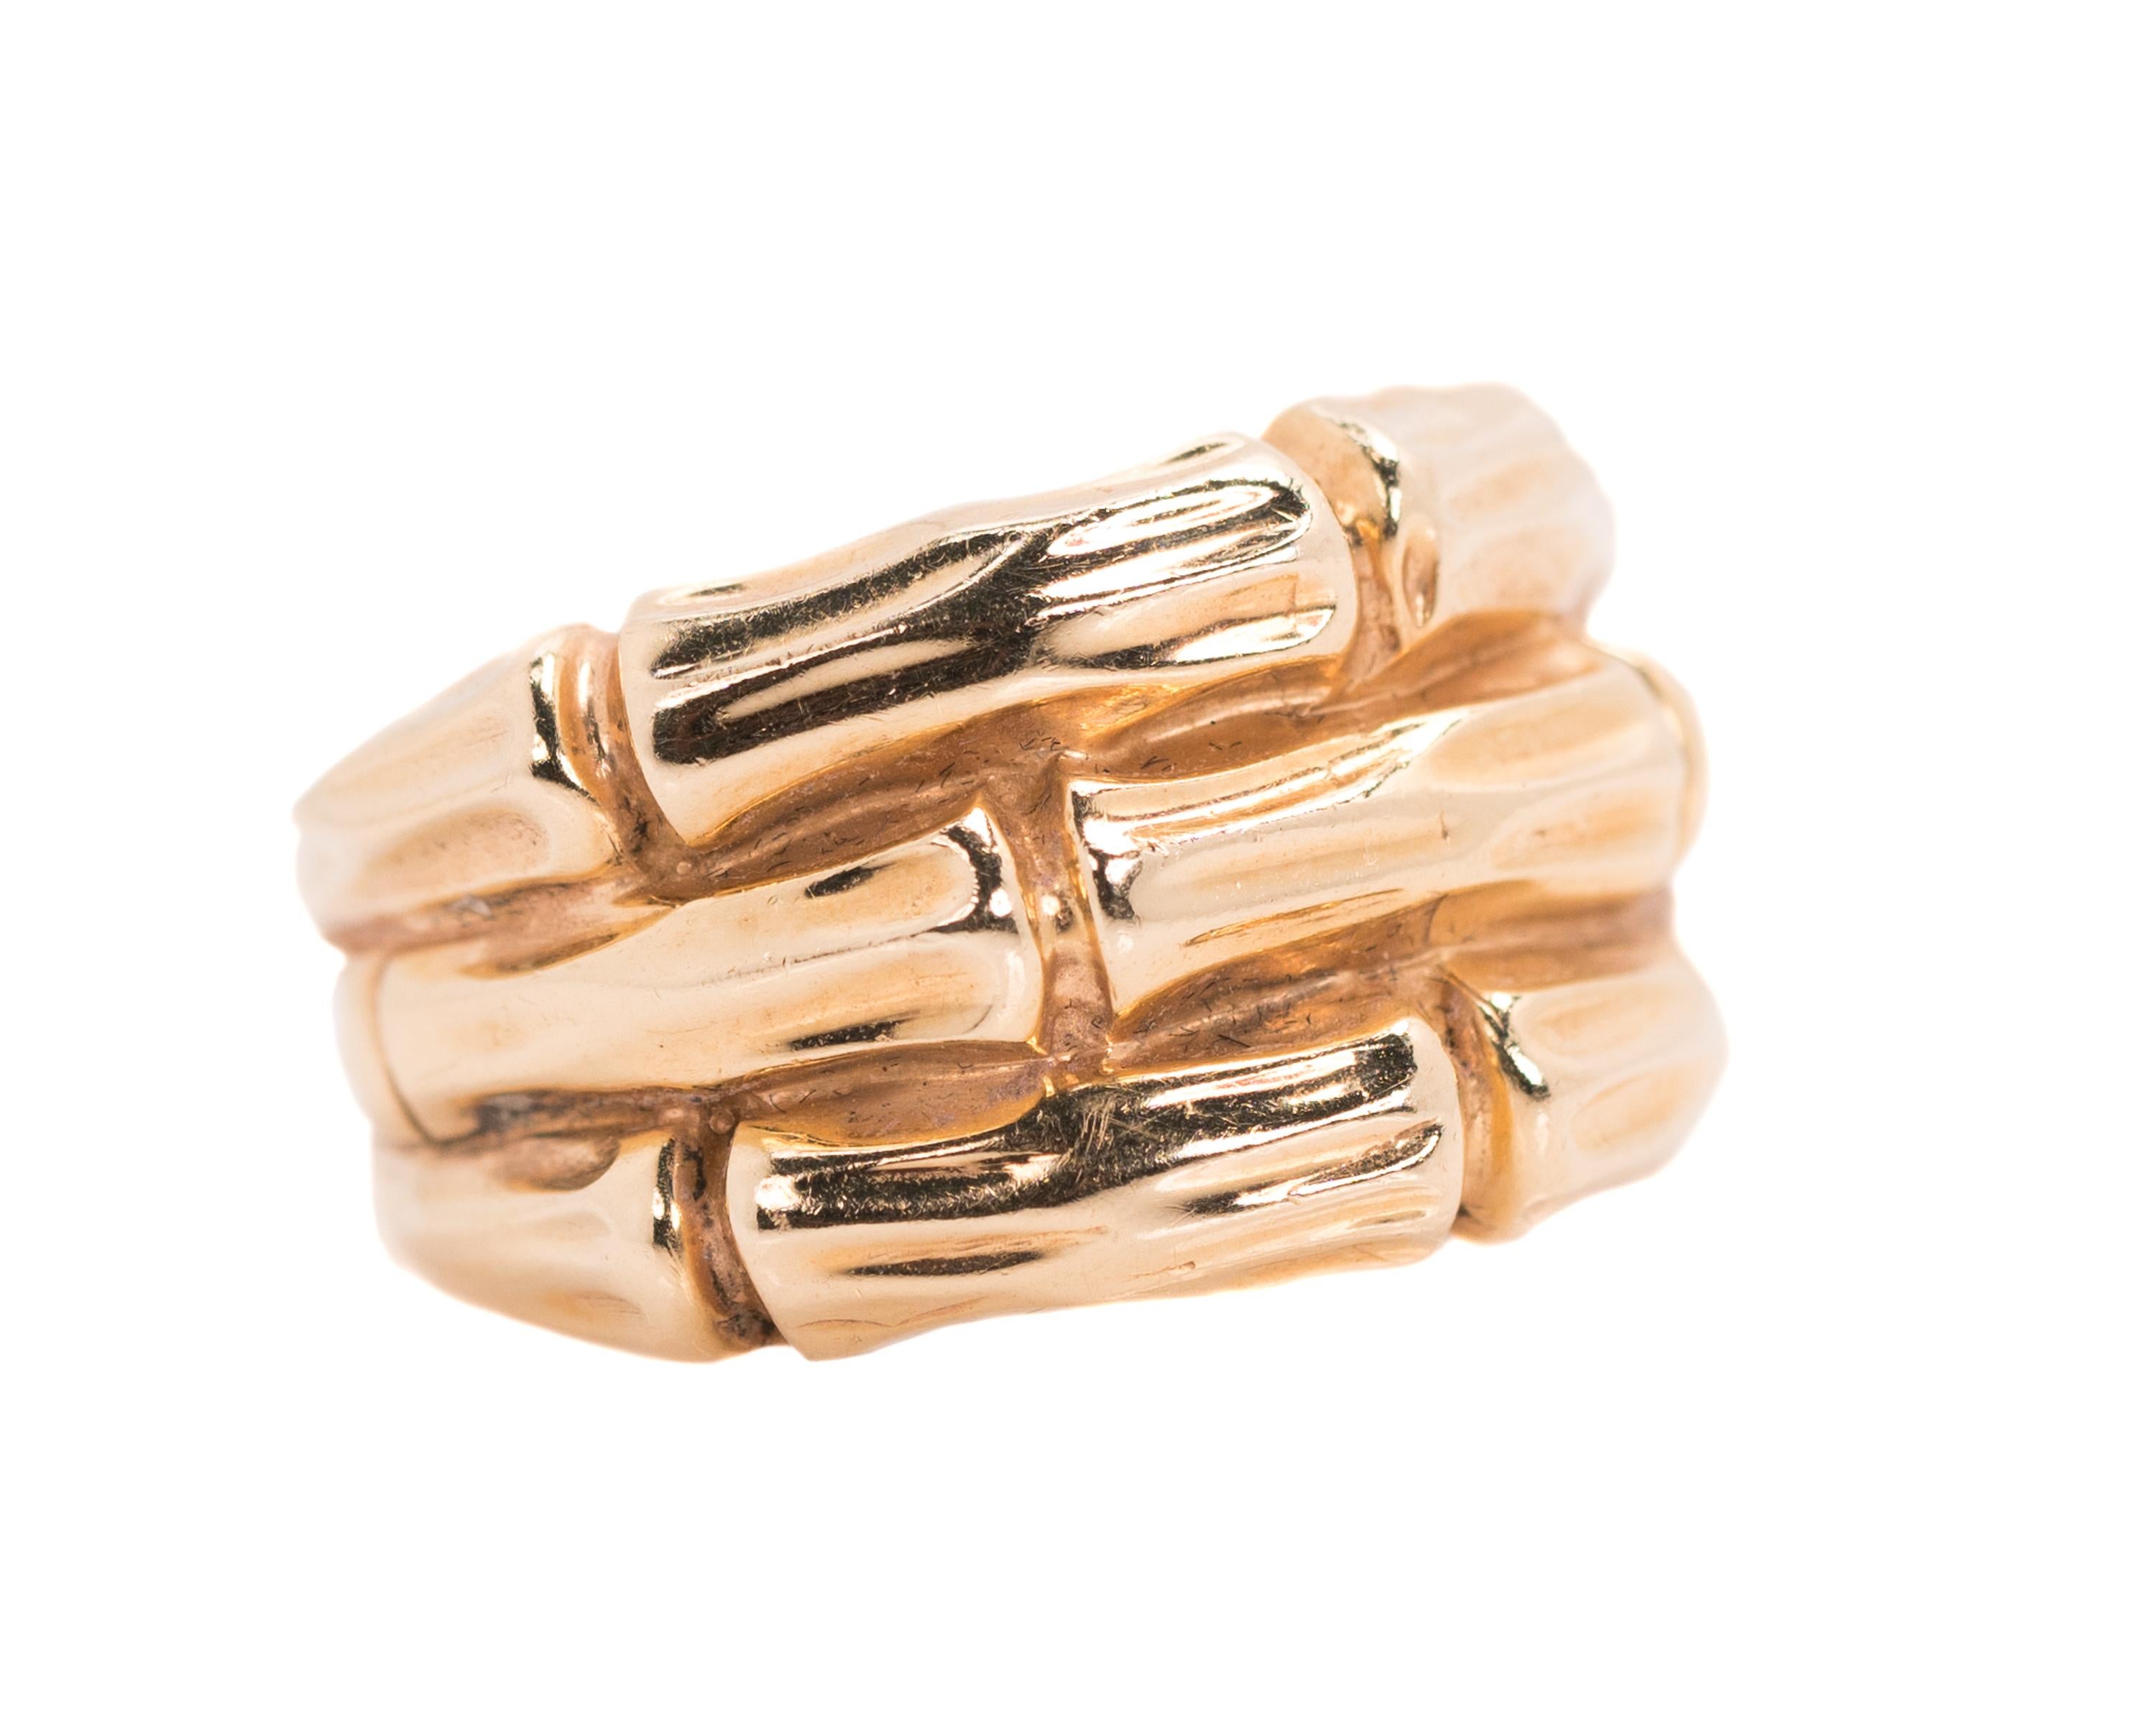 1950s Retro Bamboo Ring - 14 Karat Yellow Gold

Features:
3 horizontal levels of Bamboo textured bands
Center back of ring is smooth
Ring width tapers from 13.5 - 5 millimeters

Ring Details:
Size: 8.5, can be resized
Metal: 14 Karat Yellow